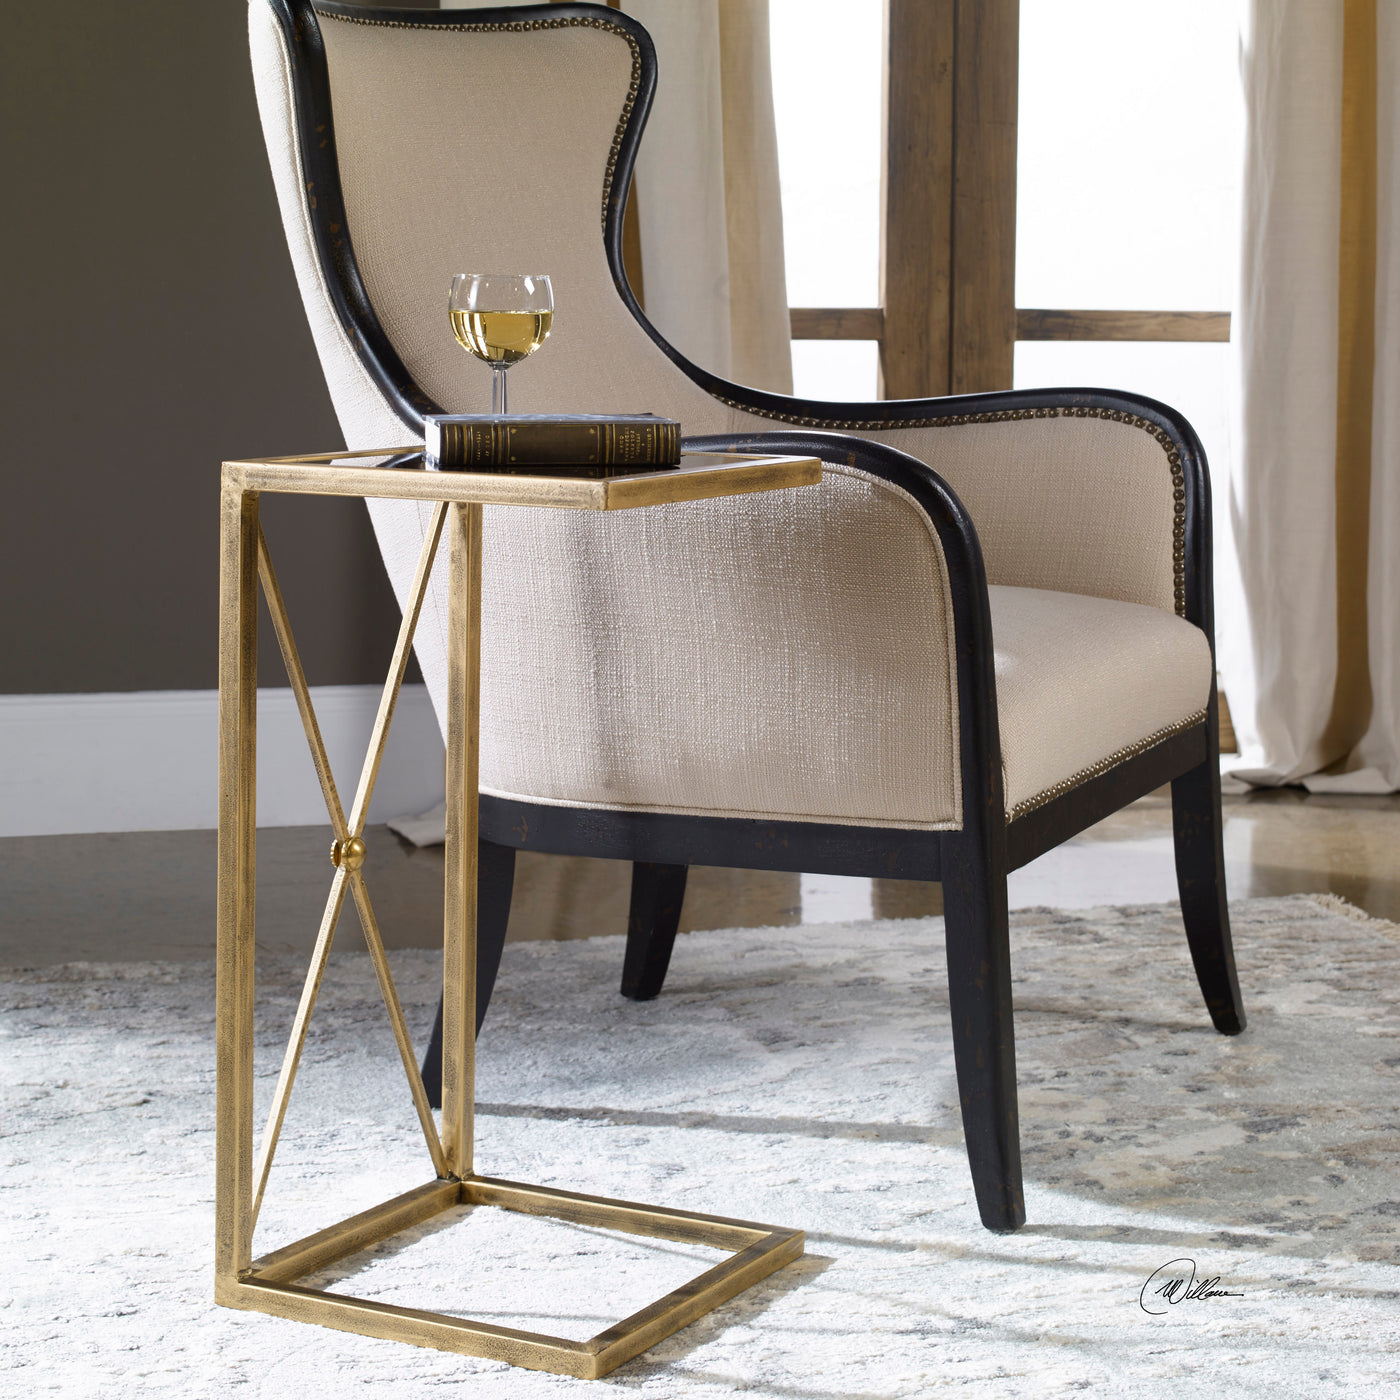 The Perfect Pull Up Table Featuring A Classic Black And Gold Color Combination In Lightly Antiqued Gold Iron With A Black ...